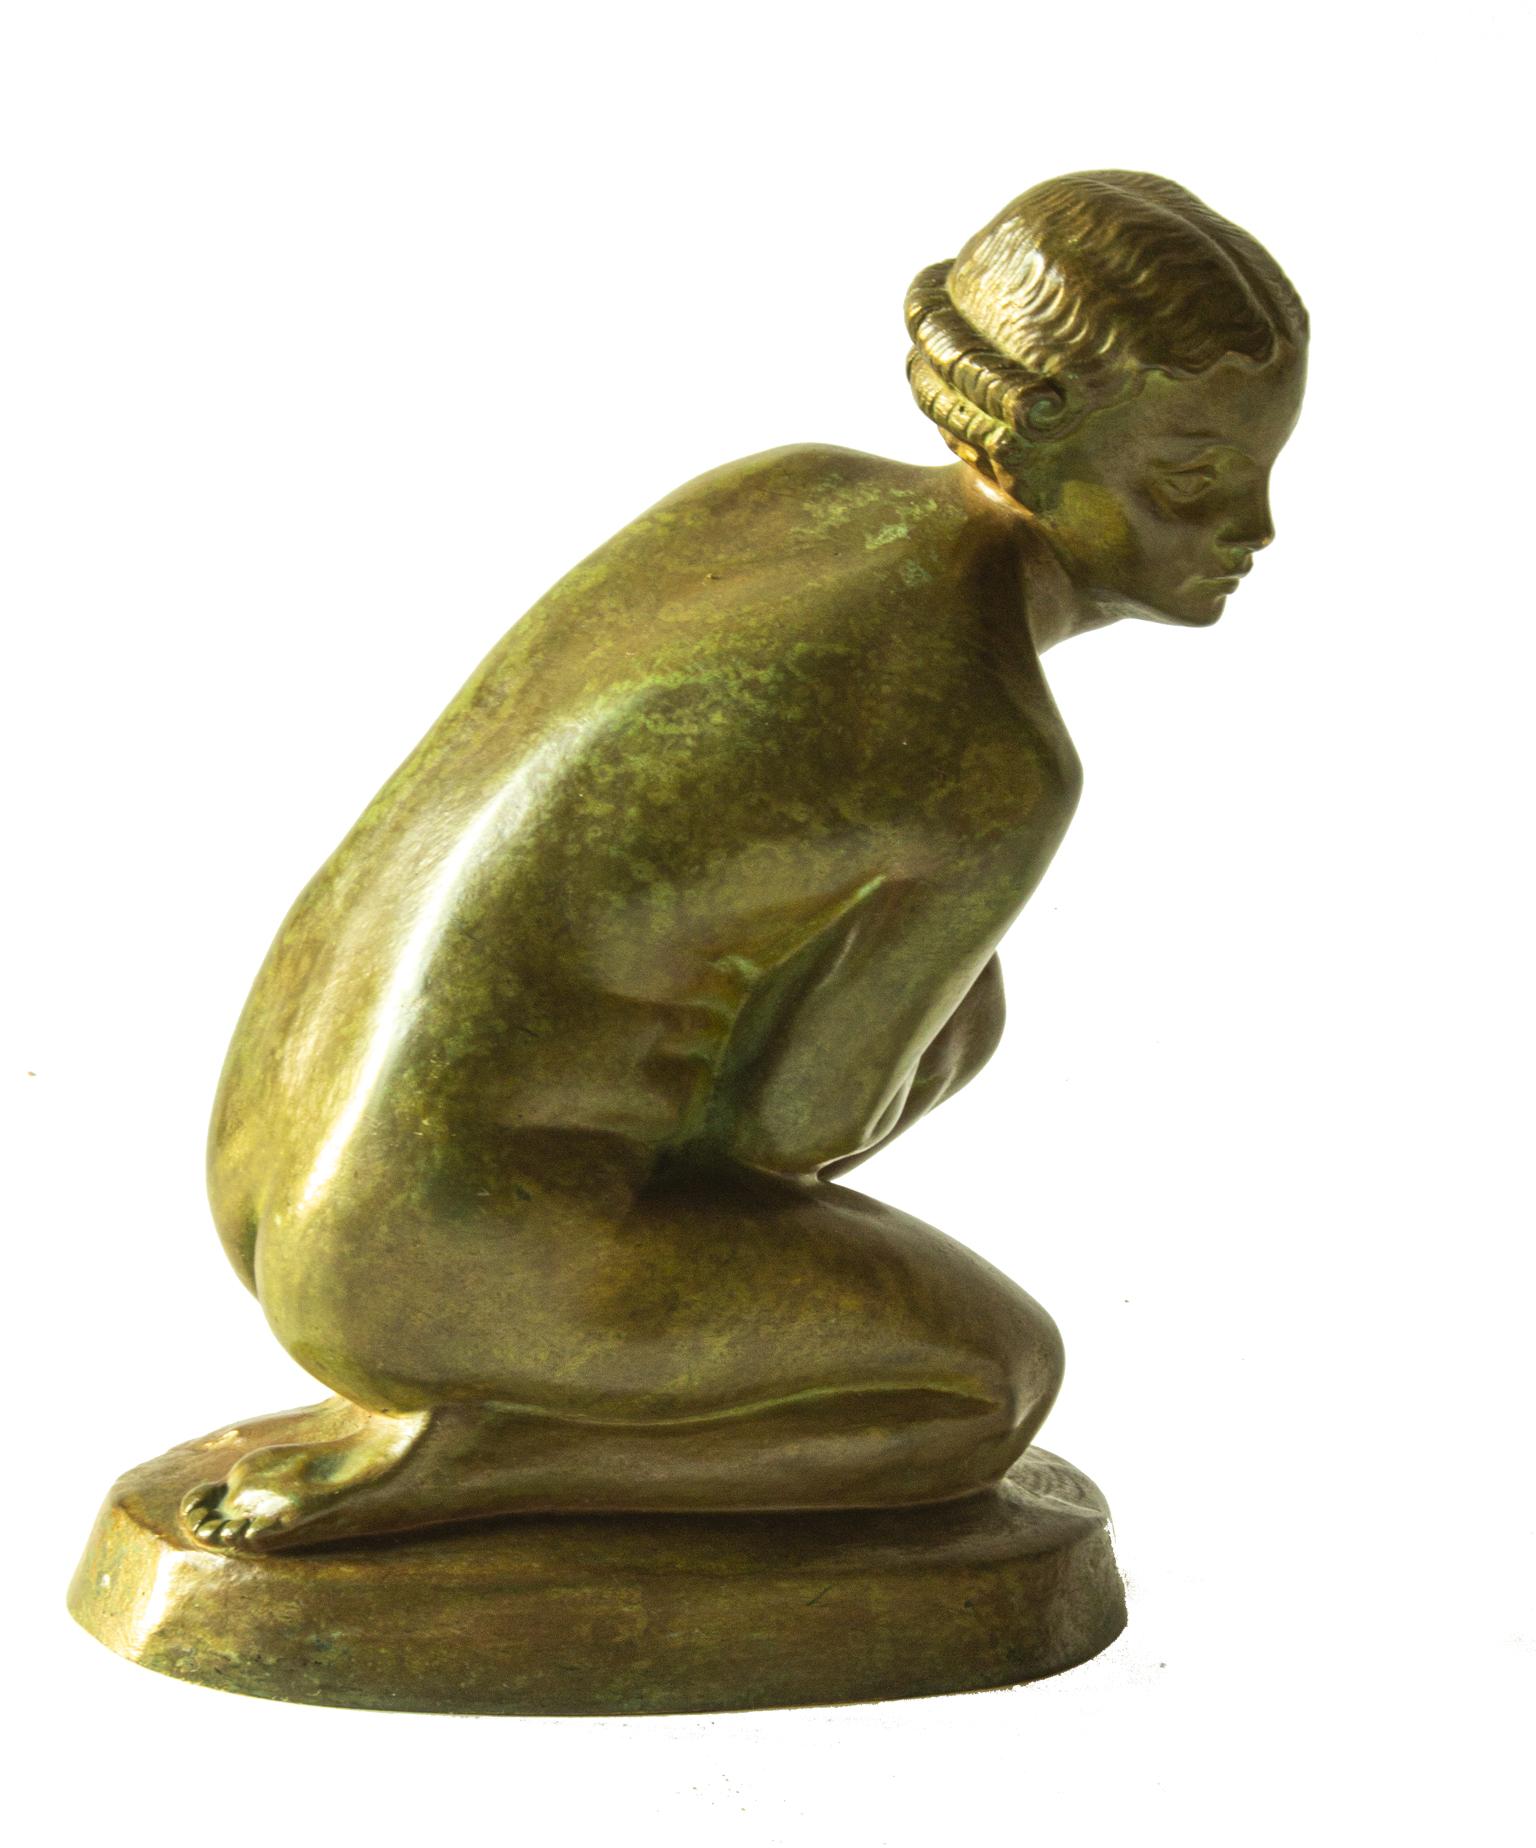 French Art Deco Bronze, Kneeling Nude Sculpture, by Lucien Charles Edouard Alliot, 1877-1967. Inscribed L.ALLIOT.

Literature: “The dictionary of sculptors in bronze” by James Mackay. ?Antique collectors club.
?“Les bronzes de XIXe siècle” by